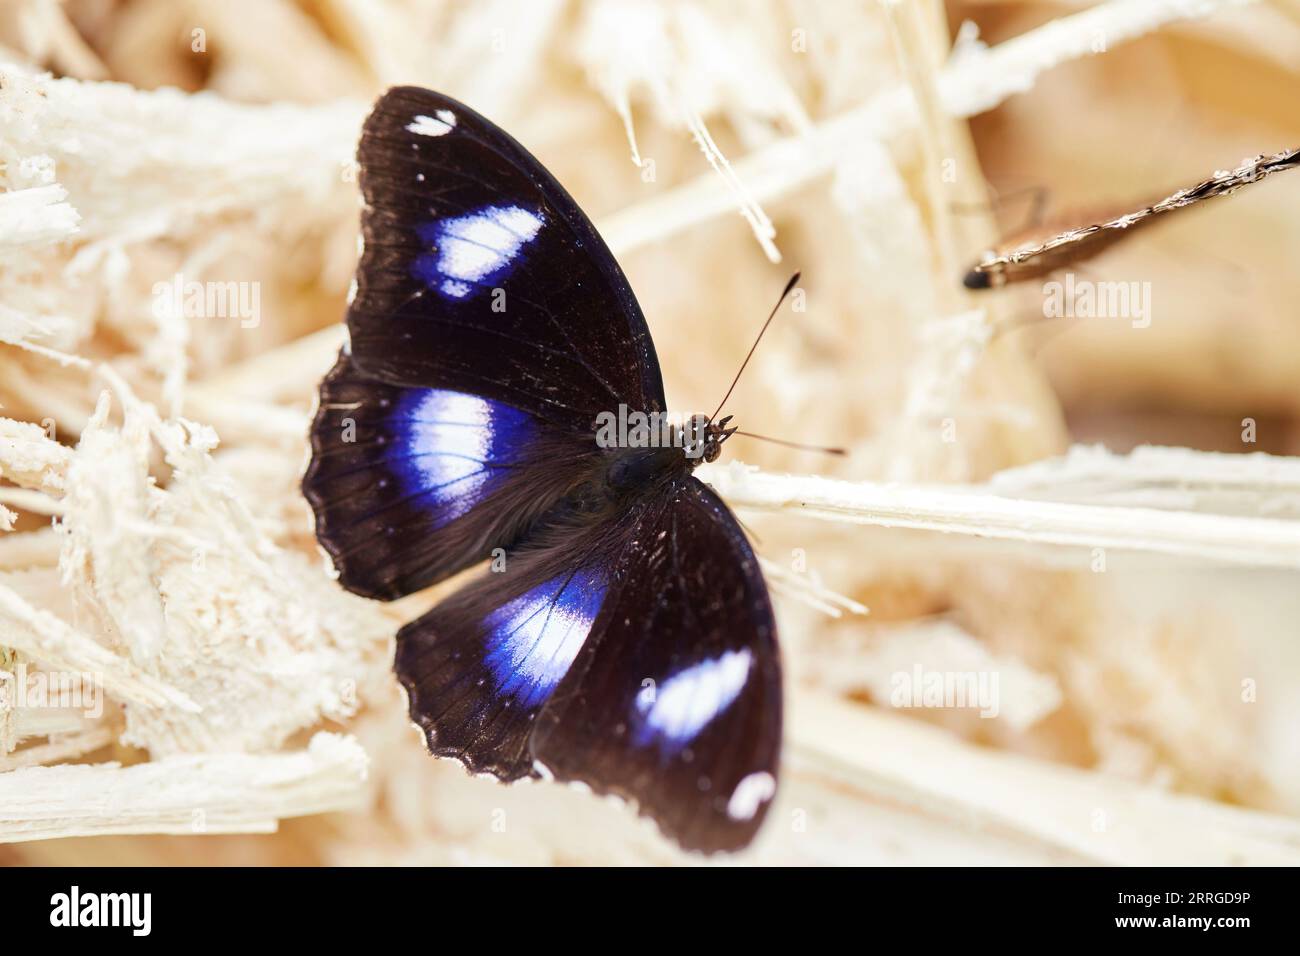 Close-up view of butterfly perching on dry straw Stock Photo